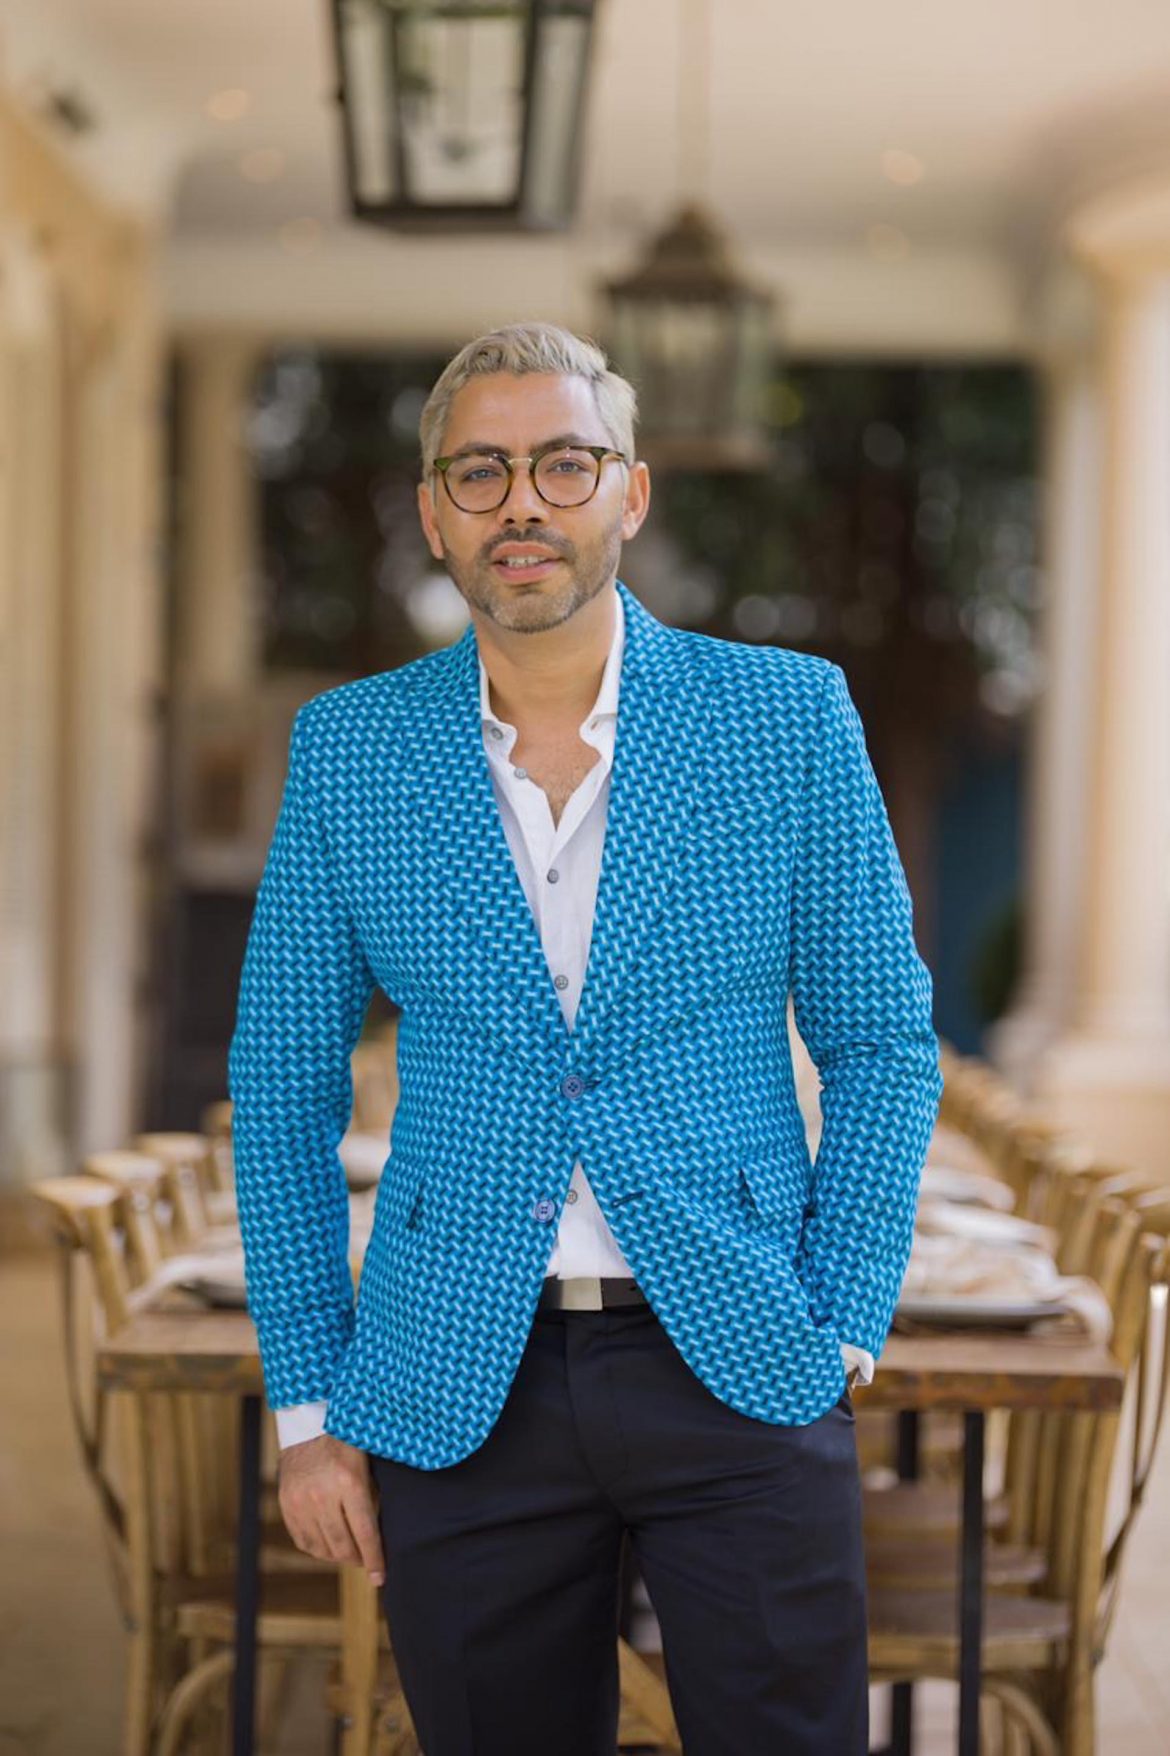 CRAIG JACOBS NAMED SA’S FIRST RECIPIENT OF THE FASHION INNOVATION AWARD